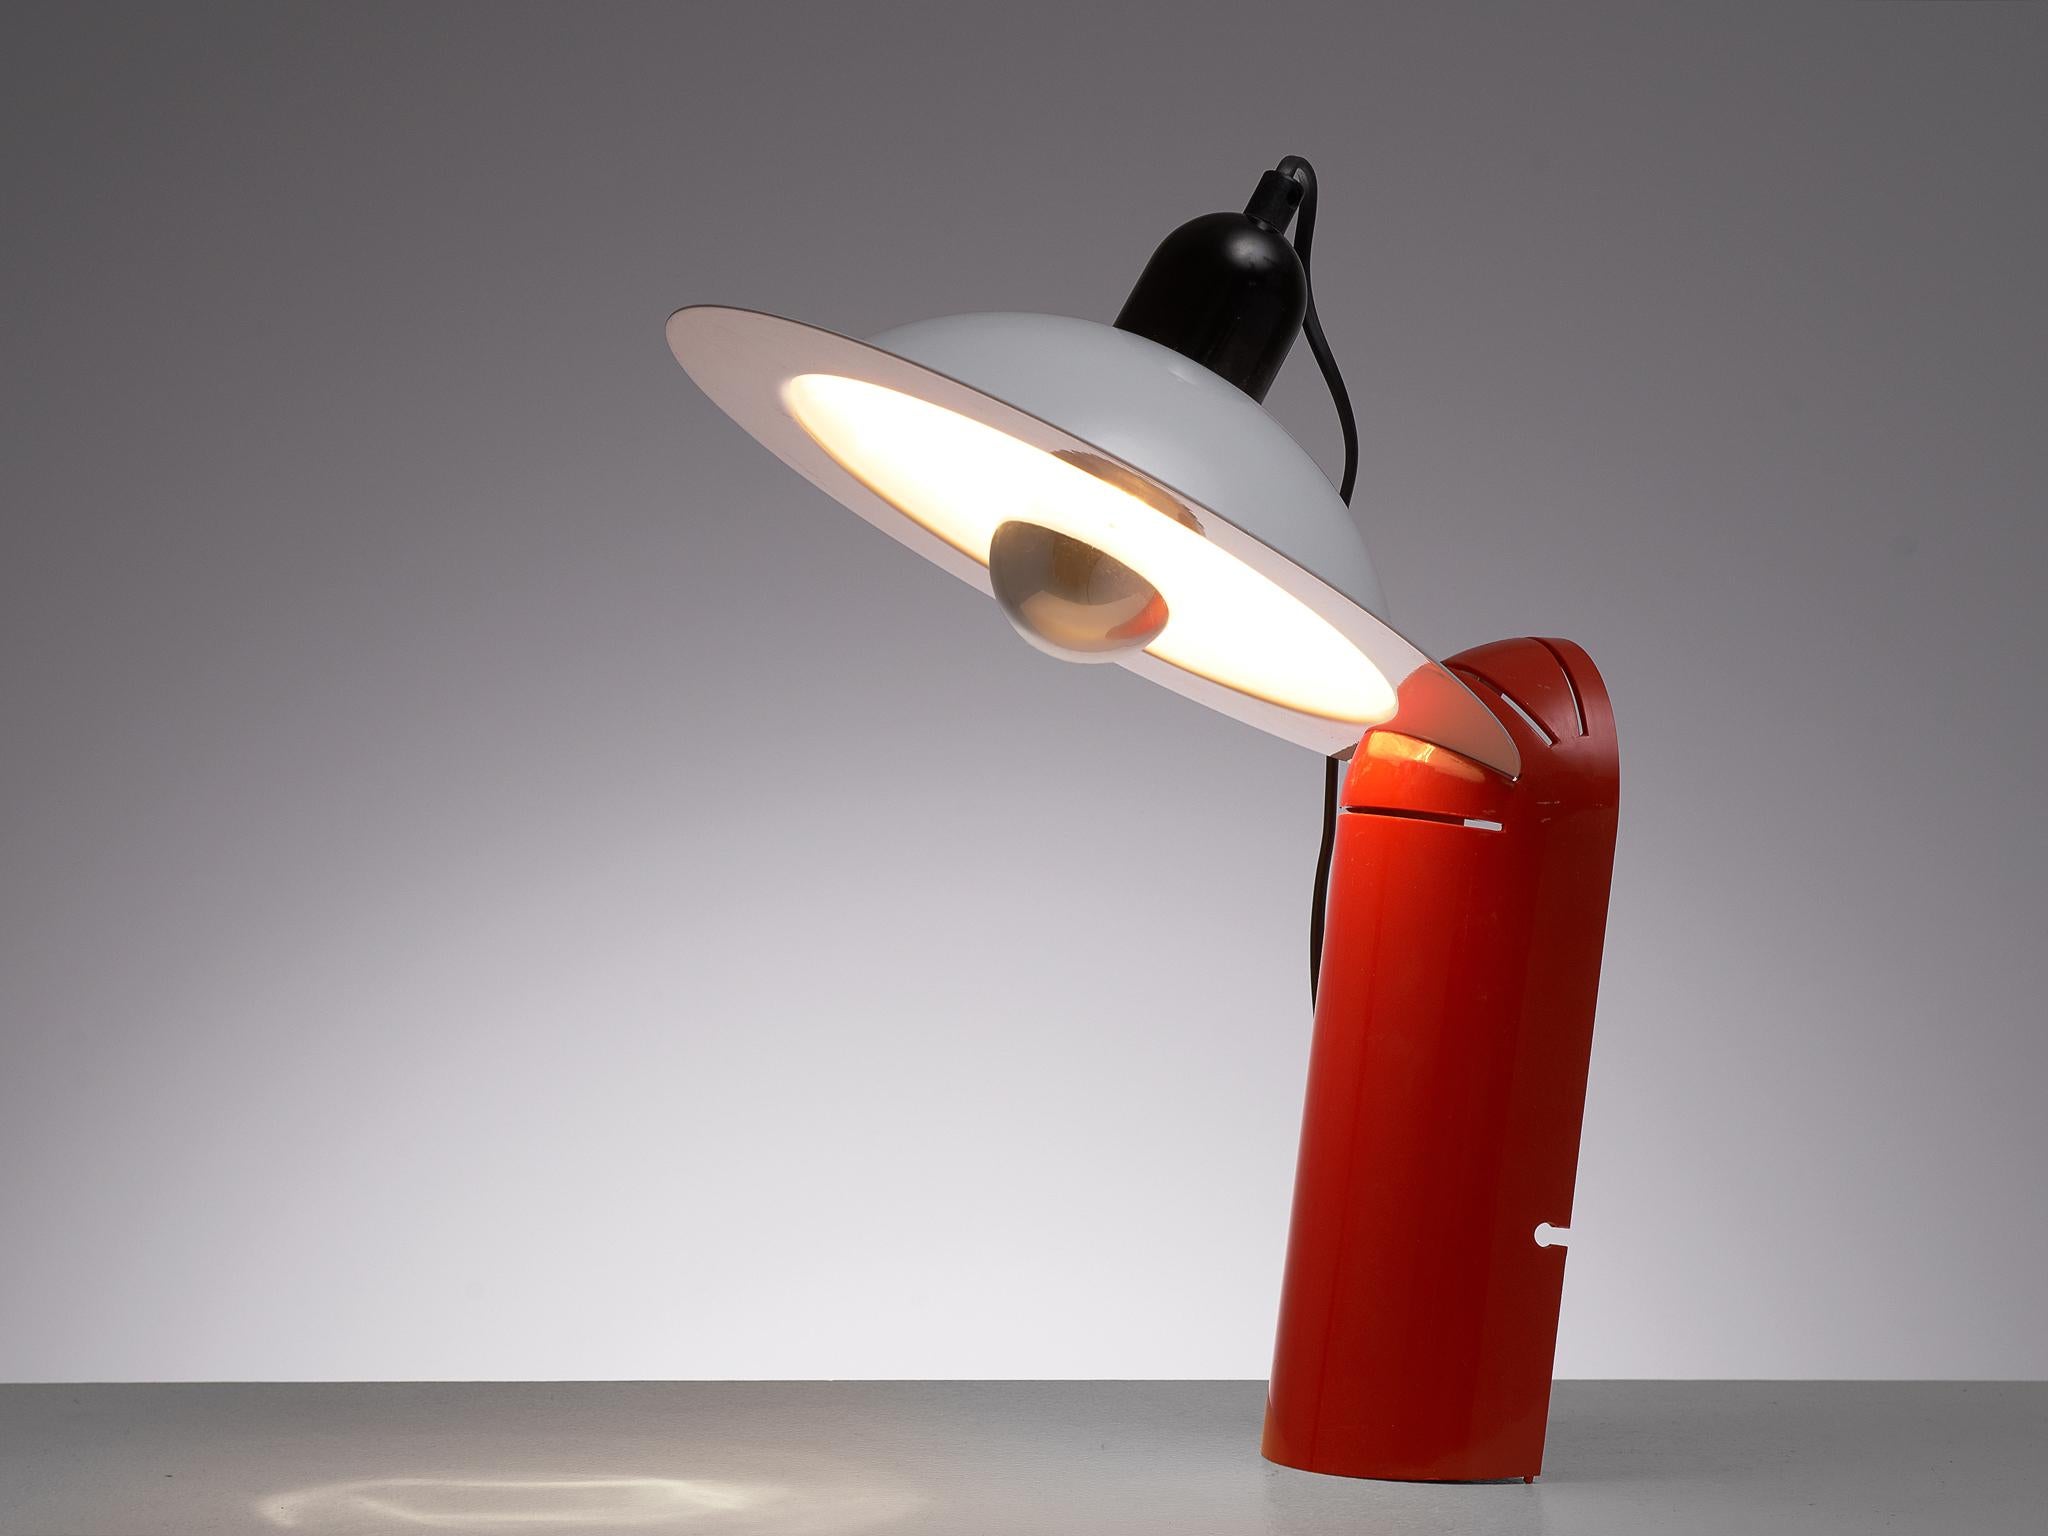 Jonathan de Pas, Donato d'Urbino,Paolo Lomazzi for Stilnovo, table lamp model 'Lampiatta', metal, plastic, Italy, 1971

This postmodern lamp consists out of a white lamp shade and a red base out of plastic. Besides the form the lacquered metal and